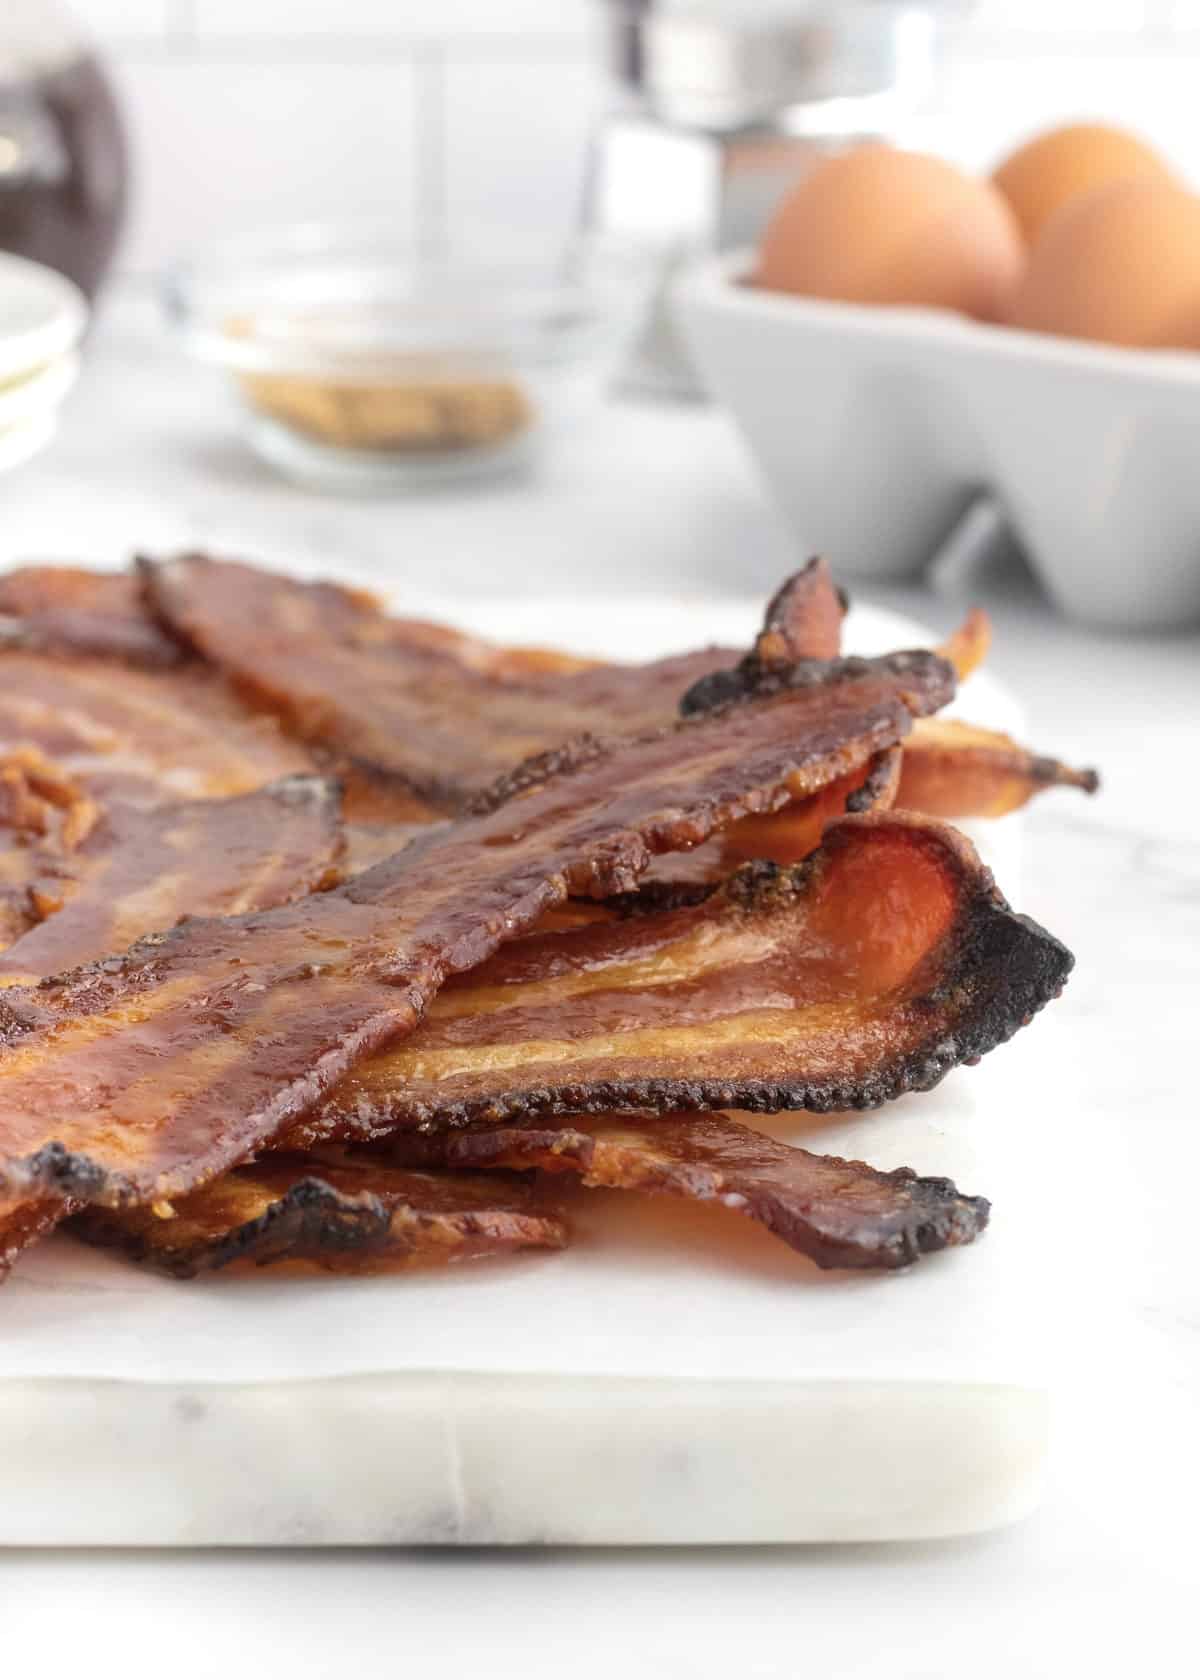 Baked Maple Brown Sugar Bacon by The BakerMama